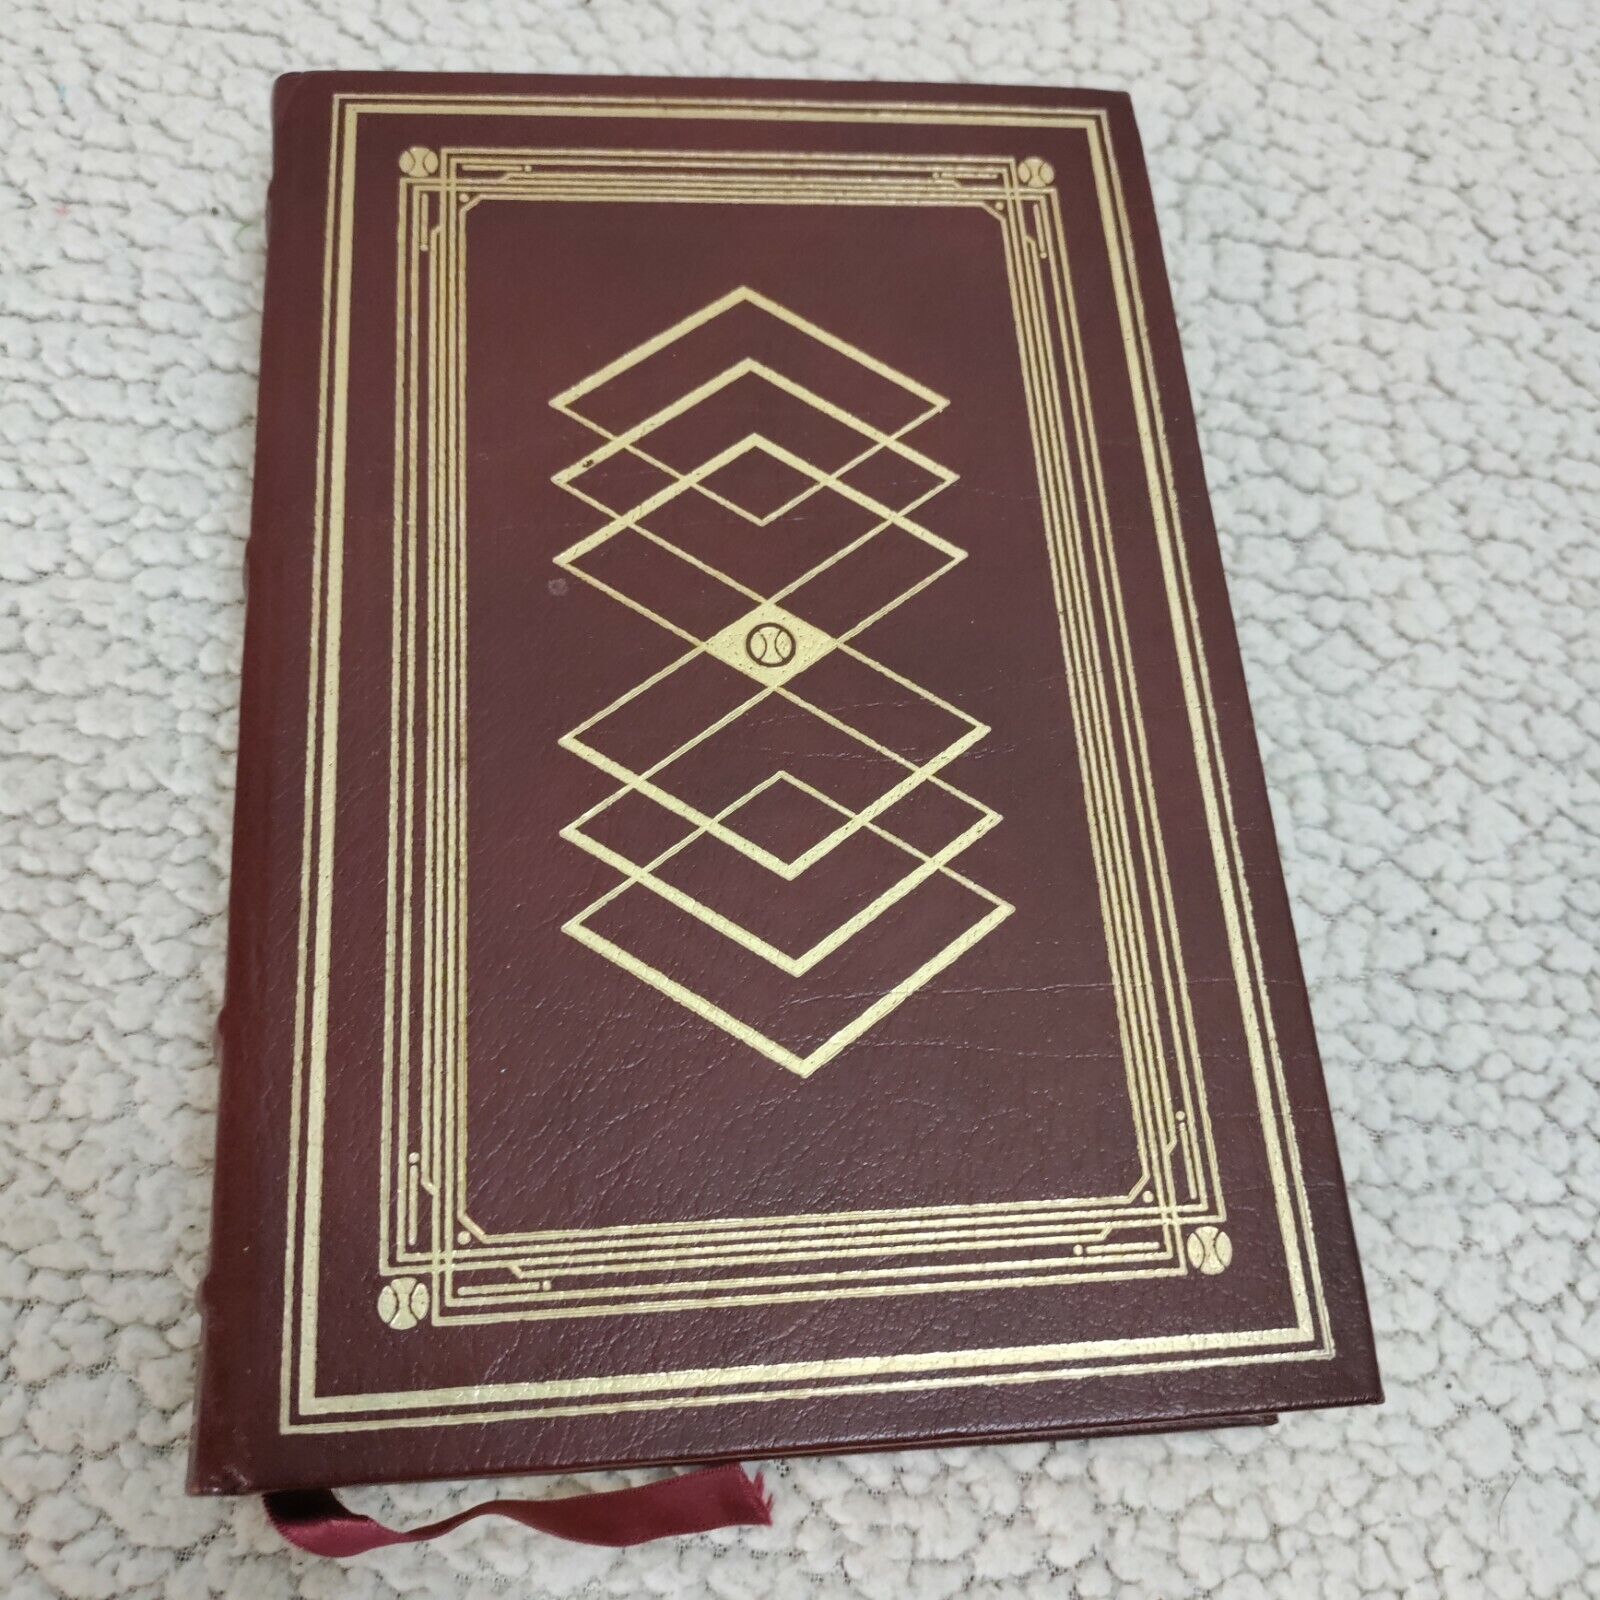 SIGNED 1st Edition Franklin Library Leather: PLIMPTON Curious Case of Sidd Finch